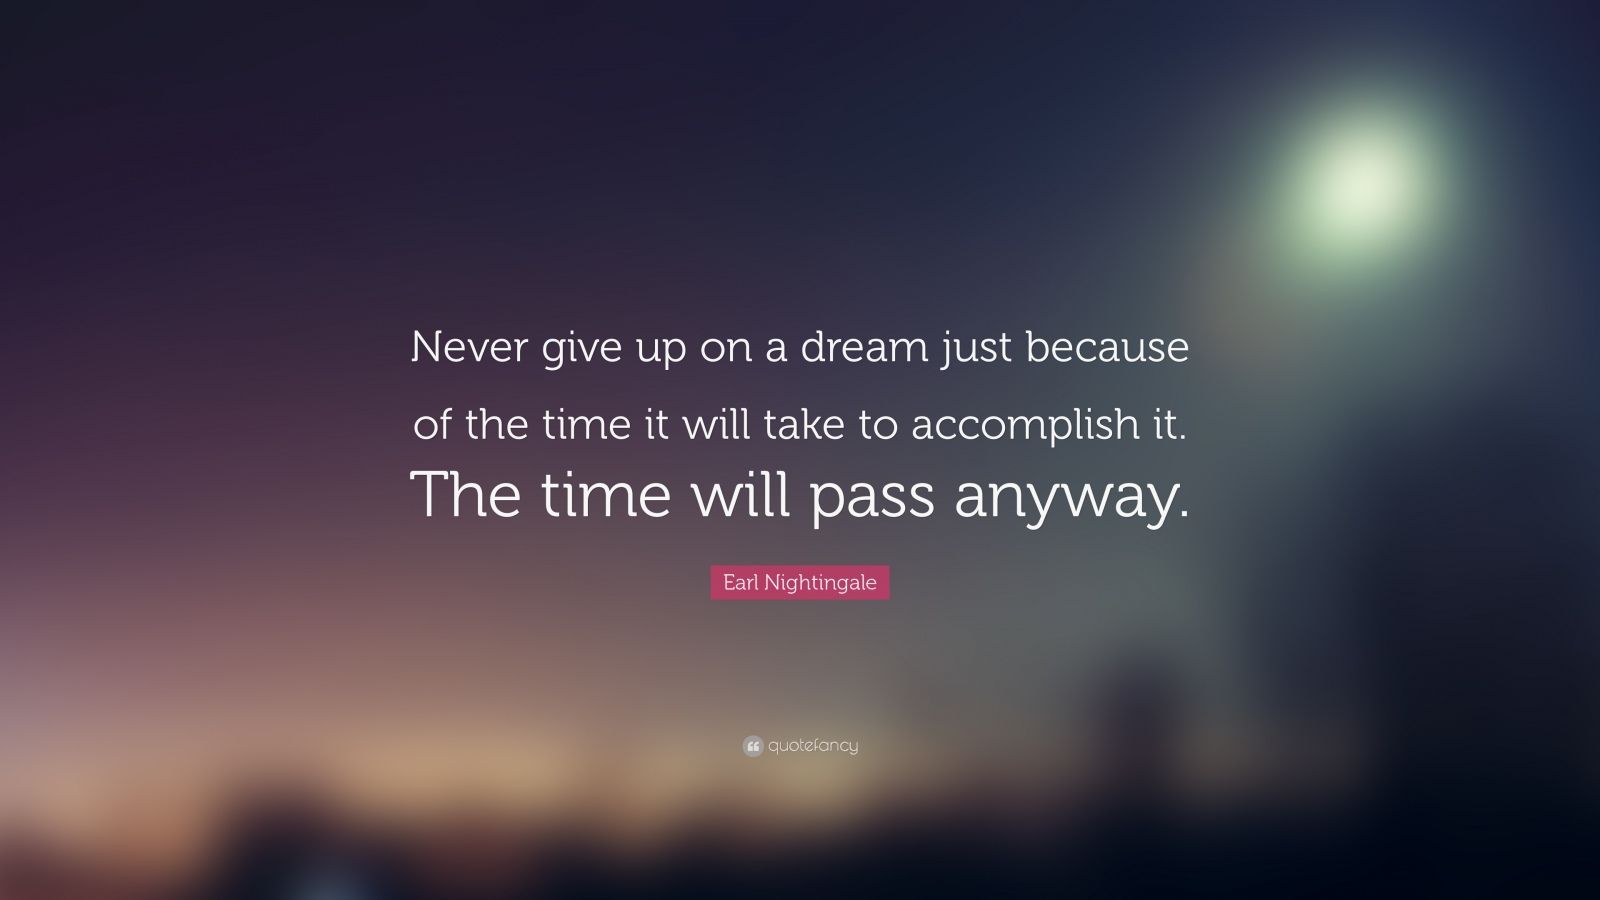 quotes about never giving up on your dreams